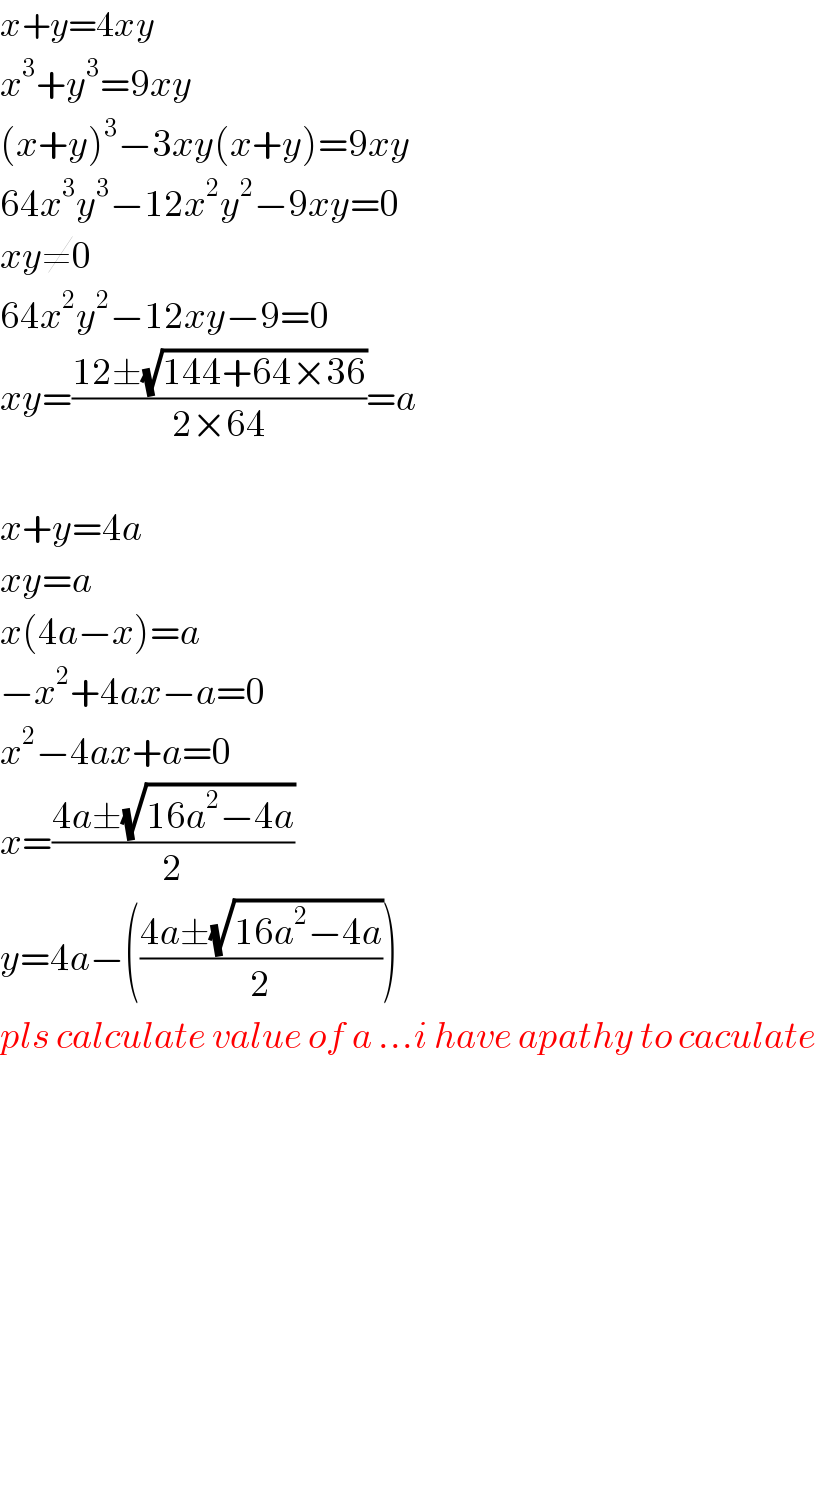 x+y=4xy  x^3 +y^3 =9xy  (x+y)^3 −3xy(x+y)=9xy  64x^3 y^3 −12x^2 y^2 −9xy=0  xy≠0  64x^2 y^2 −12xy−9=0  xy=((12±(√(144+64×36)))/(2×64))=a    x+y=4a  xy=a  x(4a−x)=a  −x^2 +4ax−a=0  x^2 −4ax+a=0  x=((4a±(√(16a^2 −4a)))/2)  y=4a−(((4a±(√(16a^2 −4a)))/2))  pls calculate value of a ...i have apathy to caculate                  